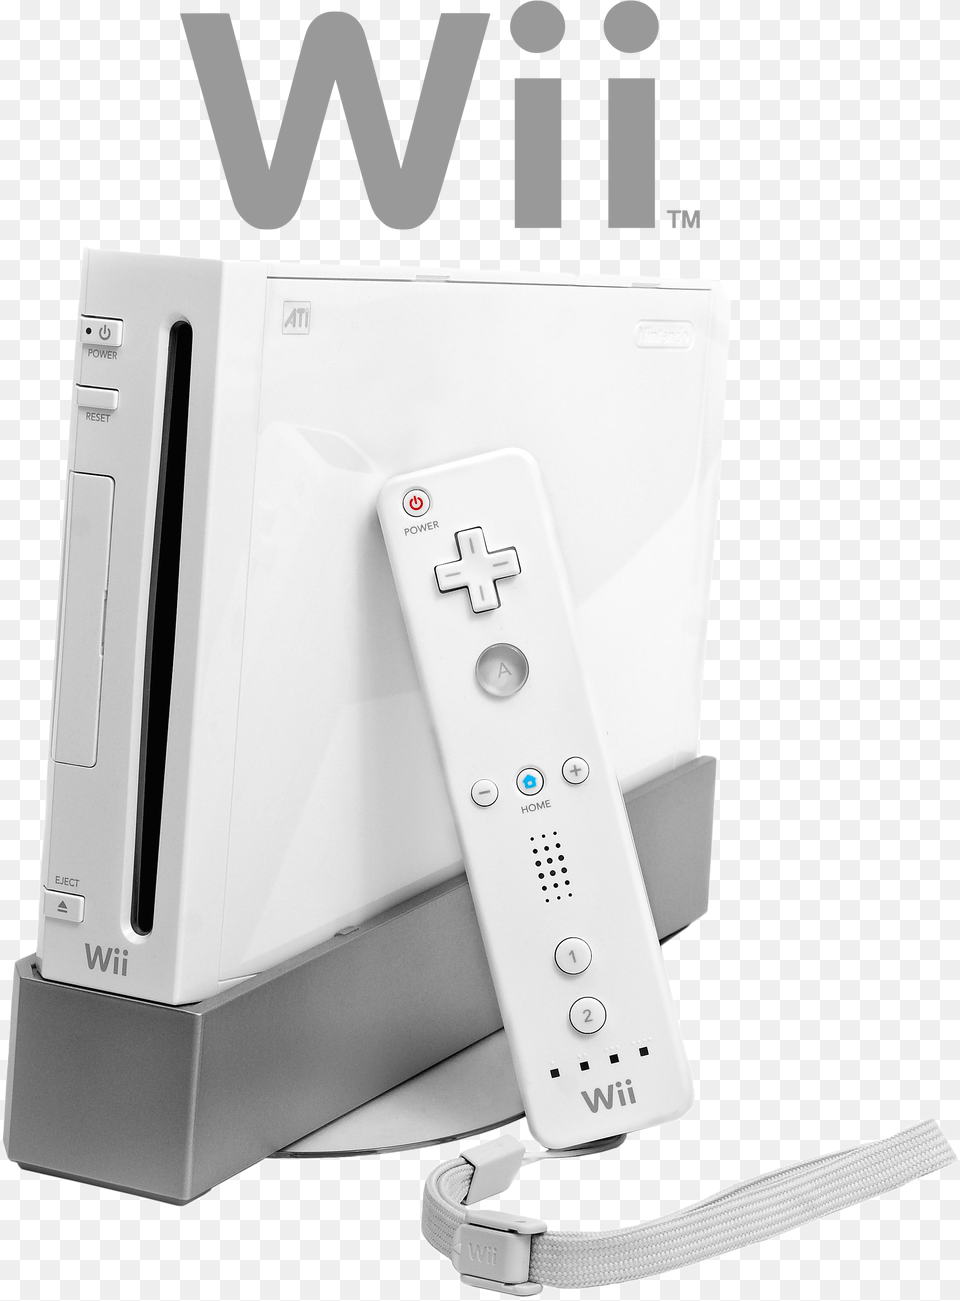 Uh Meow Nintendo Wii, Electronics, Remote Control, Appliance, Device Png Image